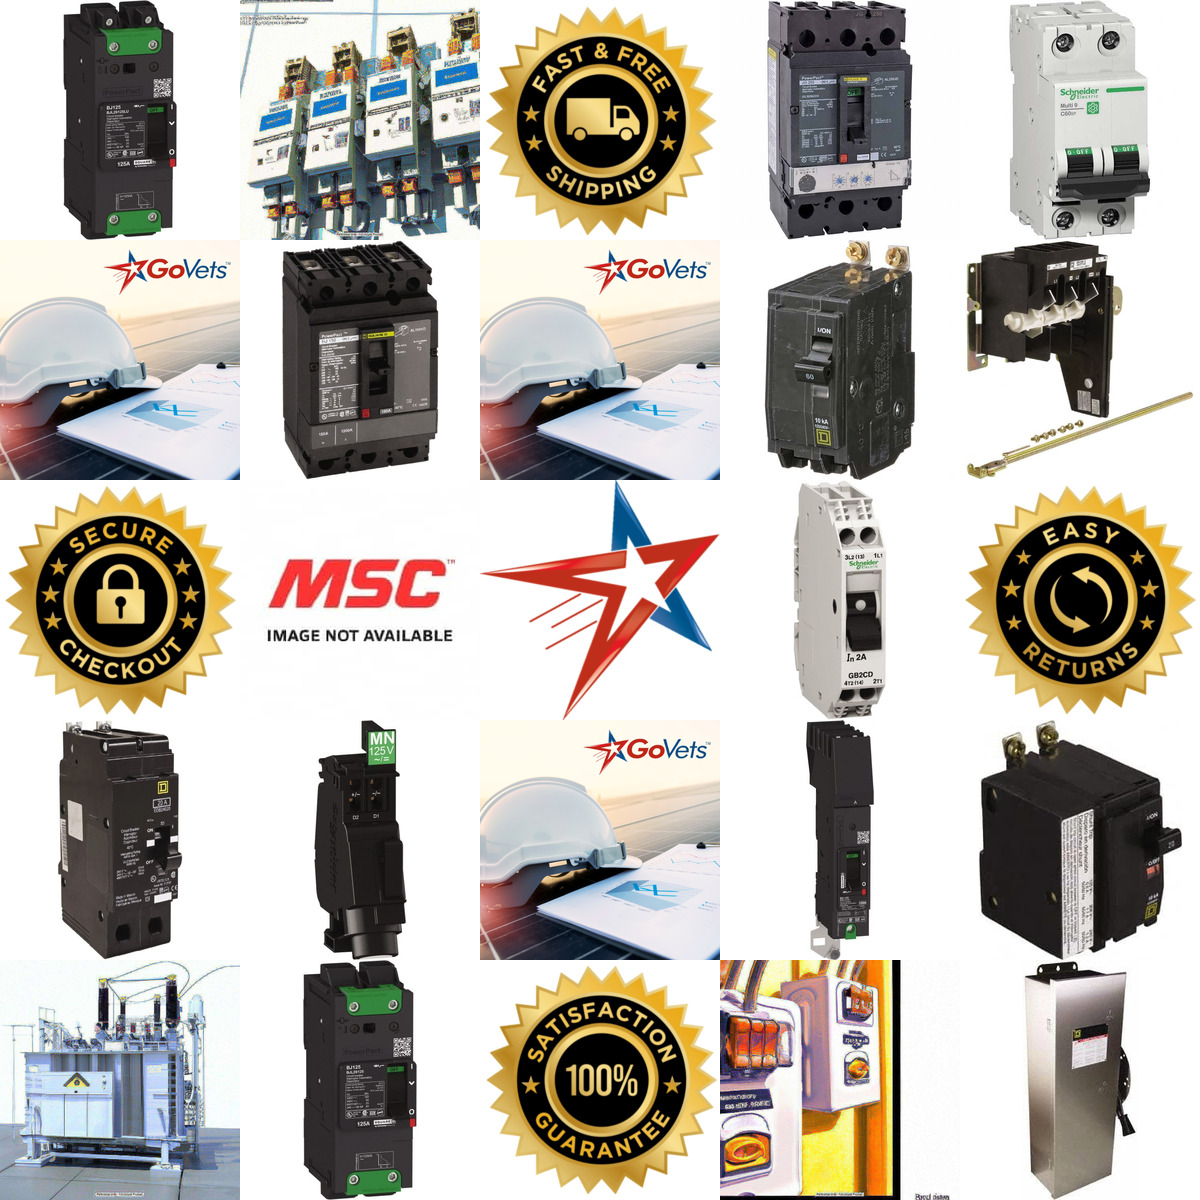 A selection of Power Distribution products on GoVets